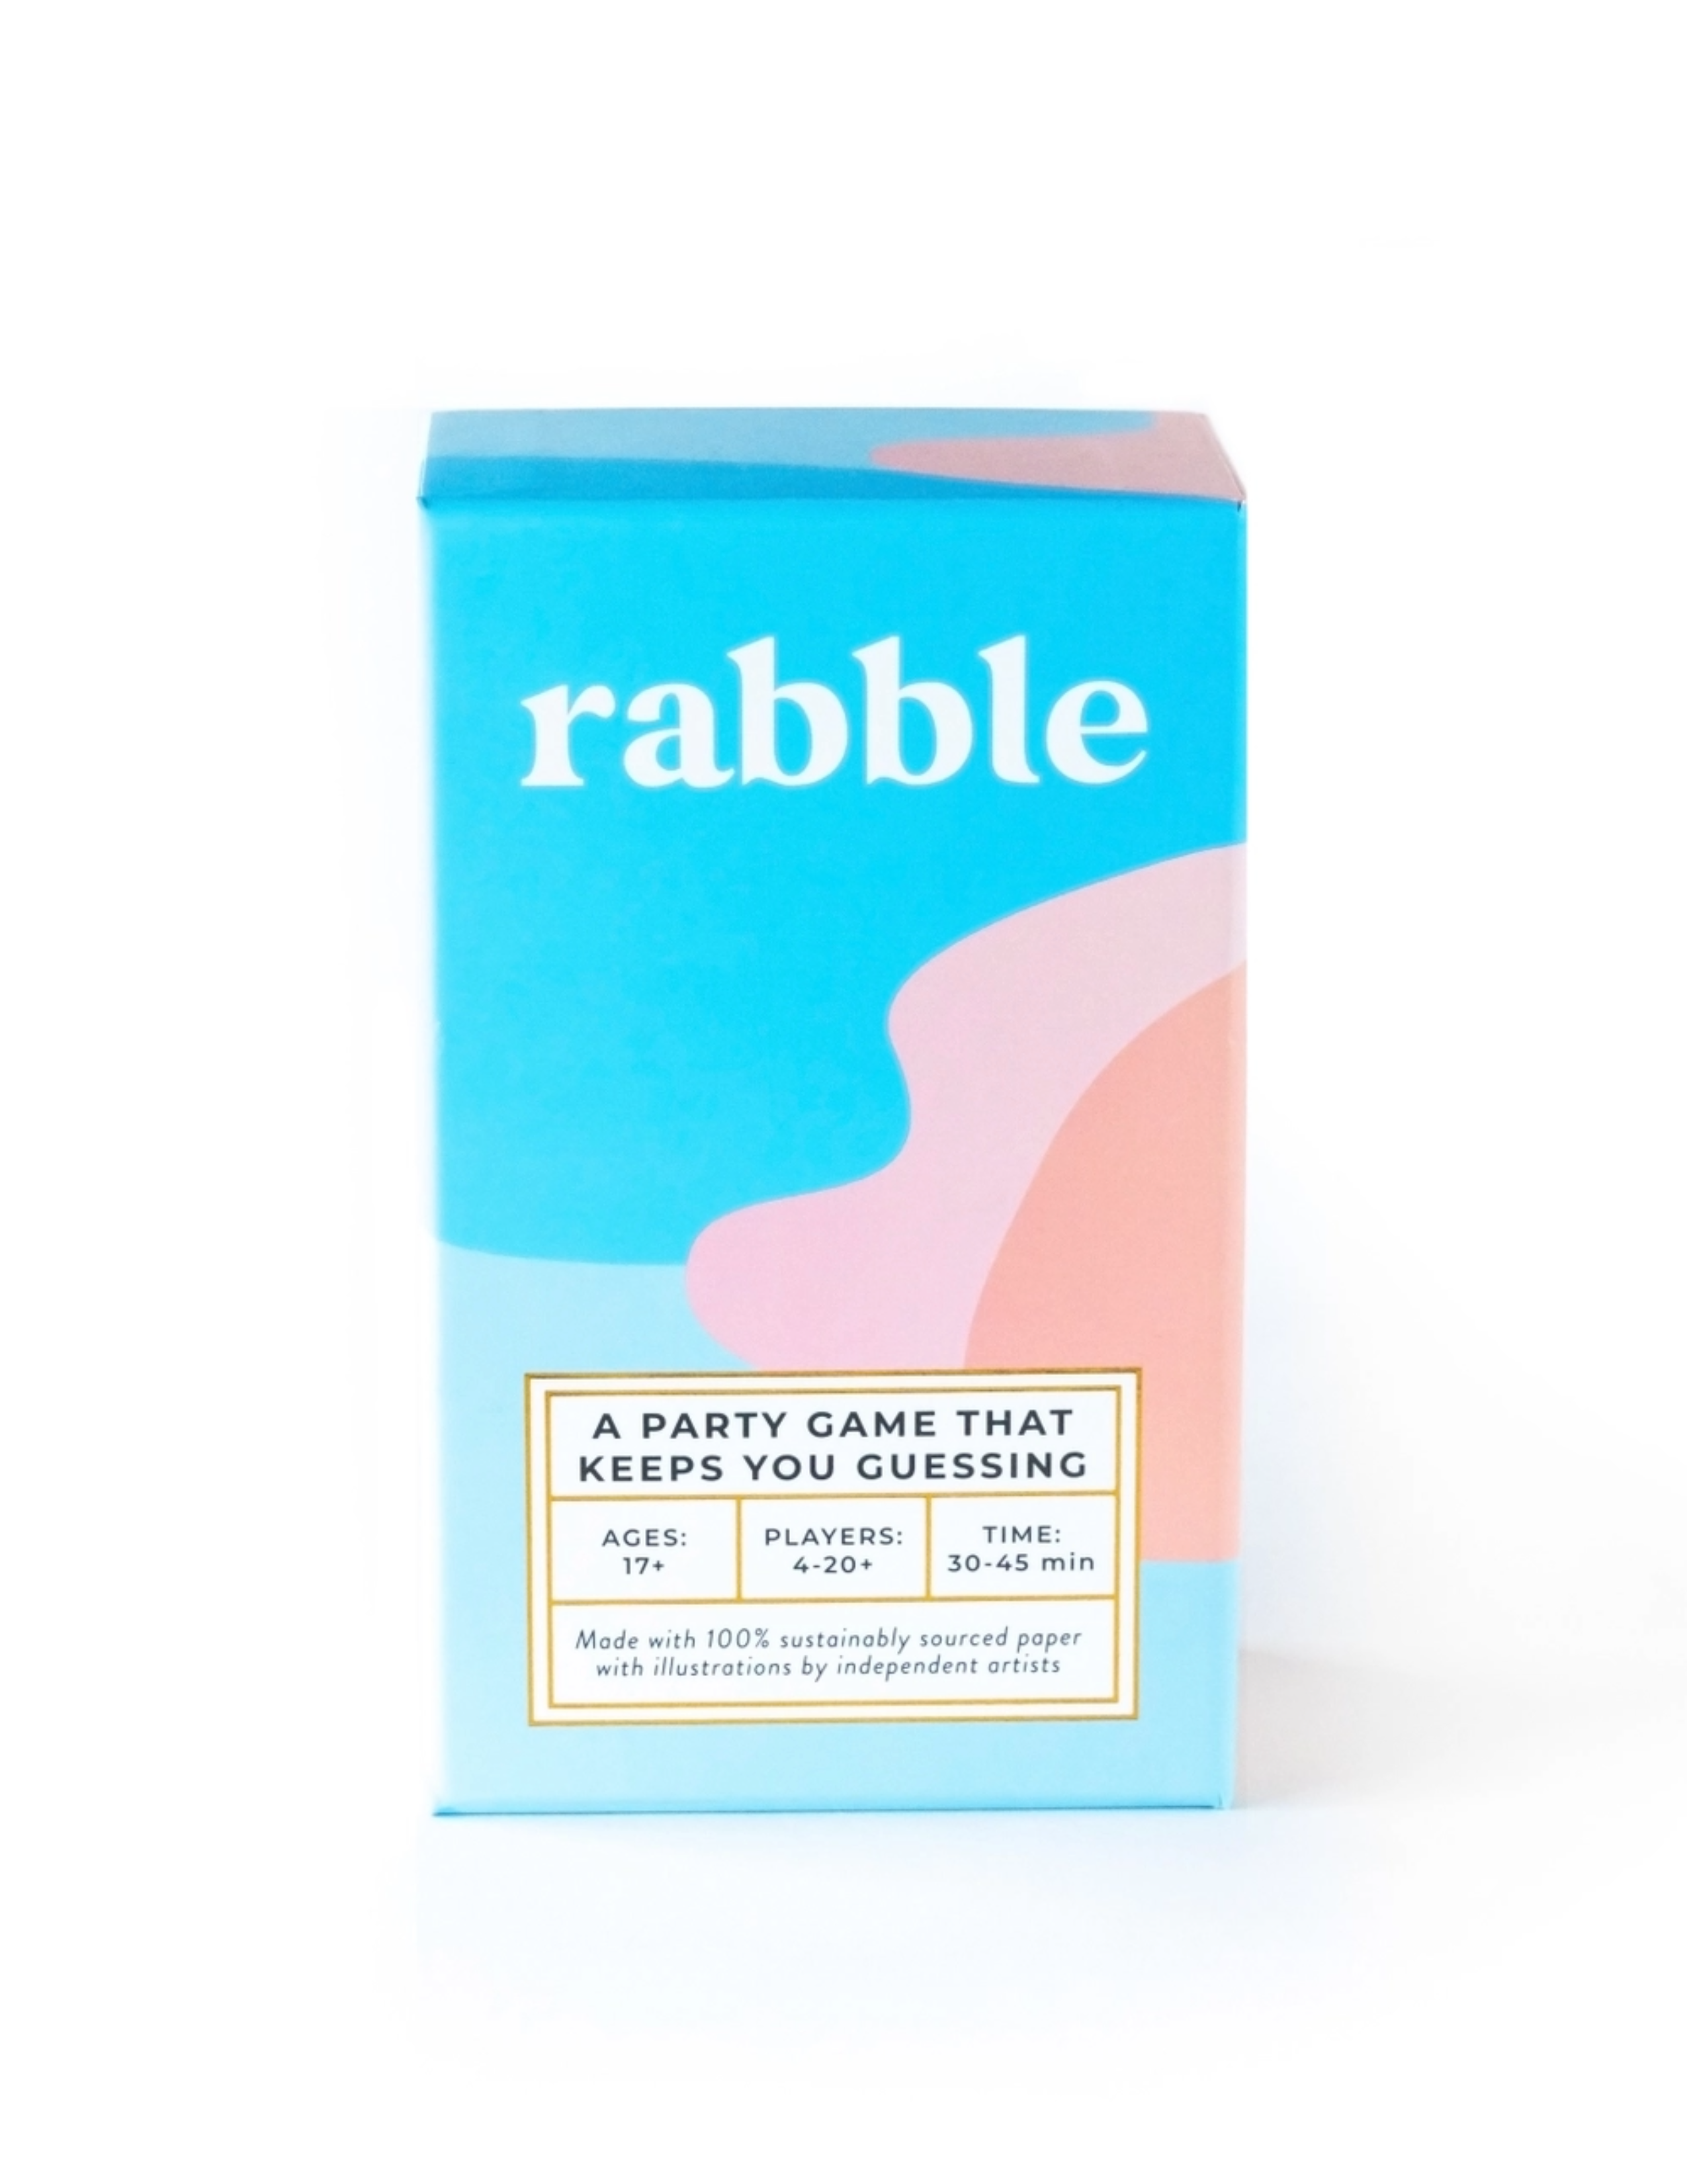 Rabble: A Party Game that Keeps You Guessing